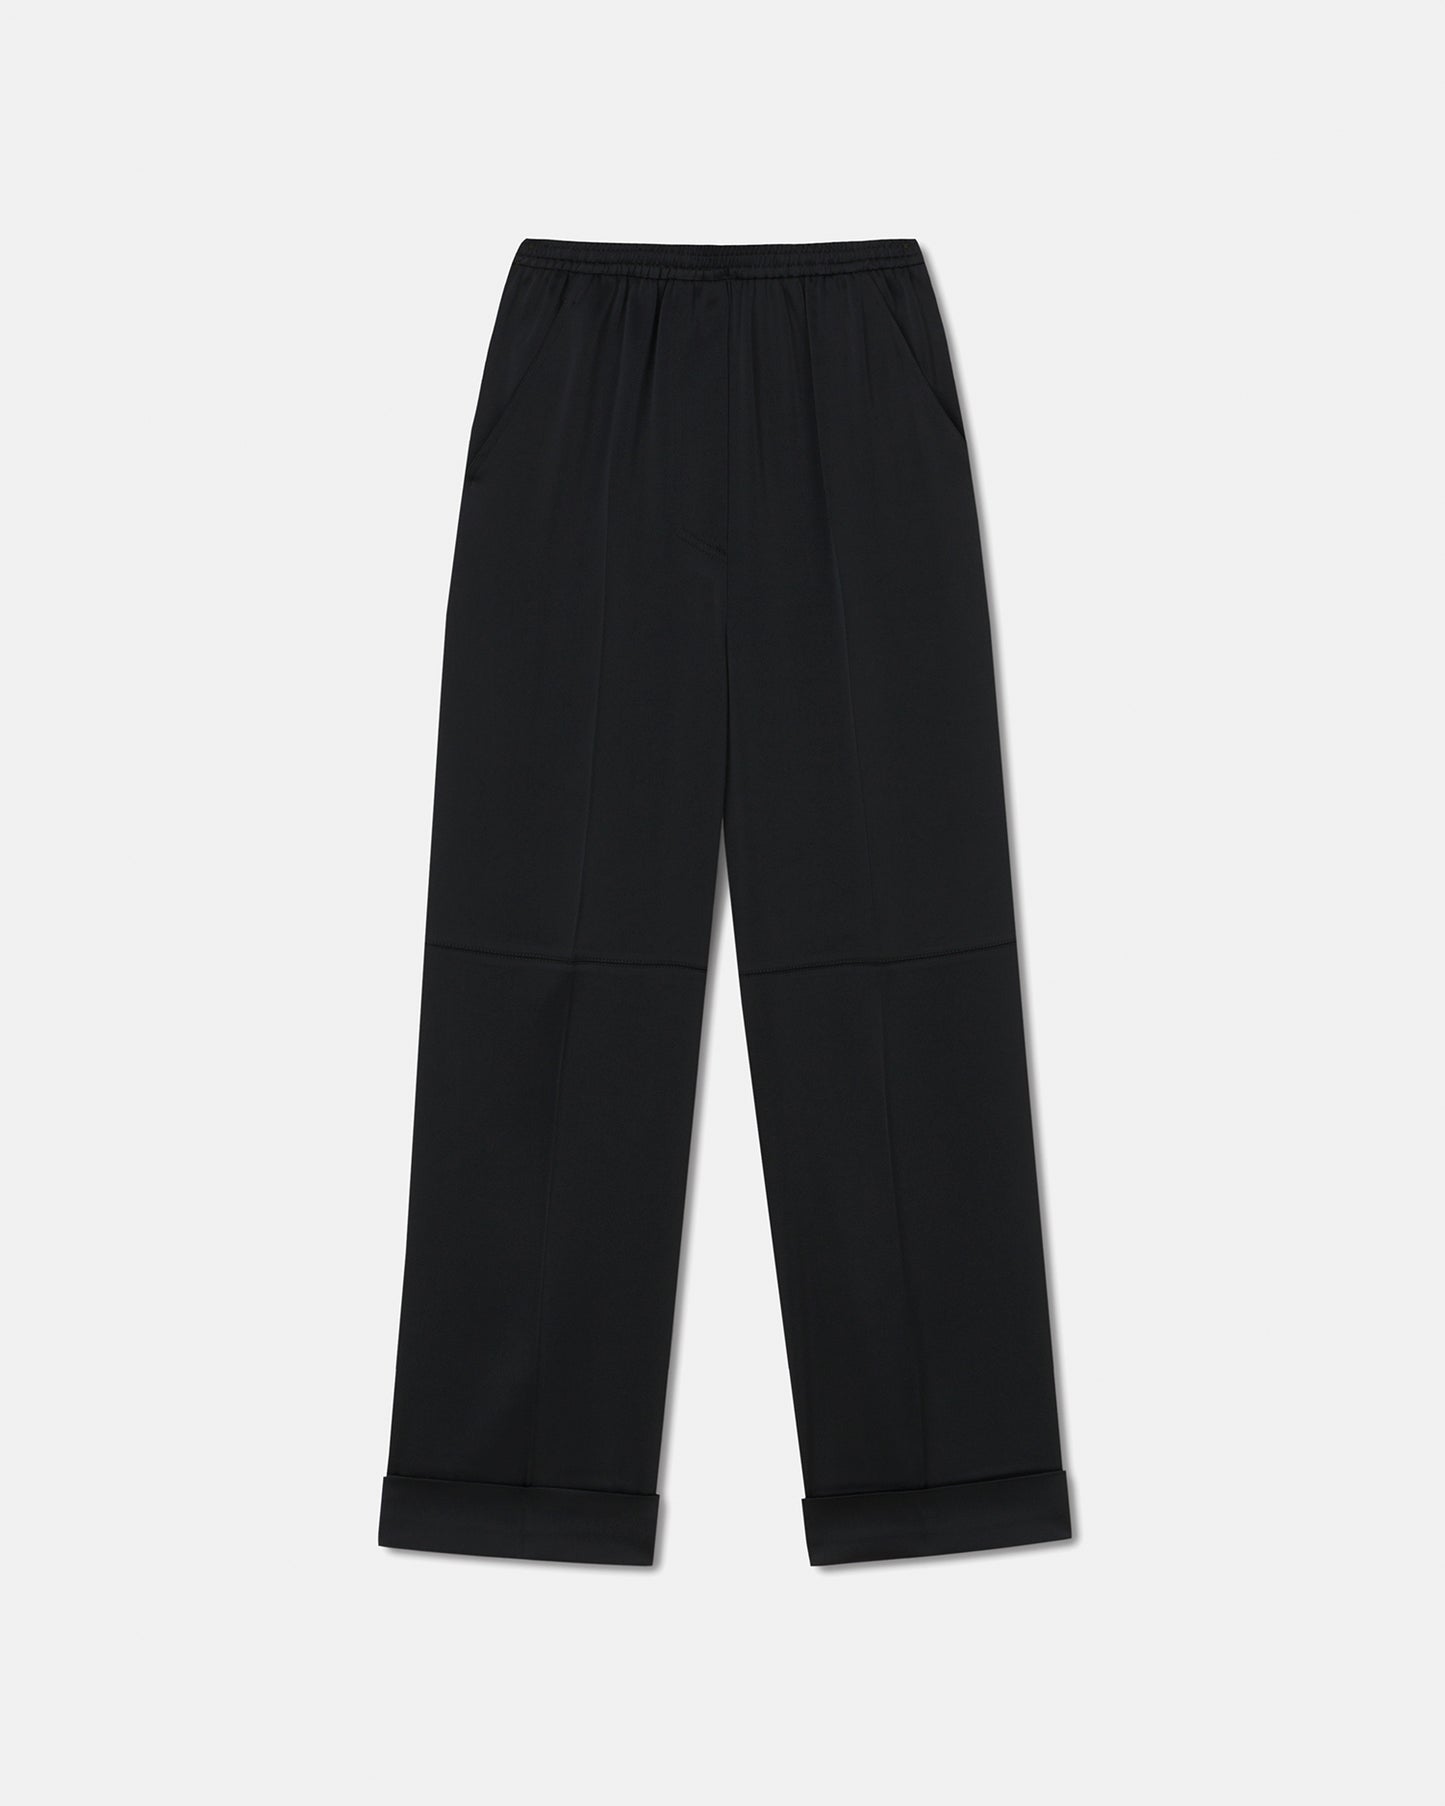 Ceira - Elasticated Trousers - Black